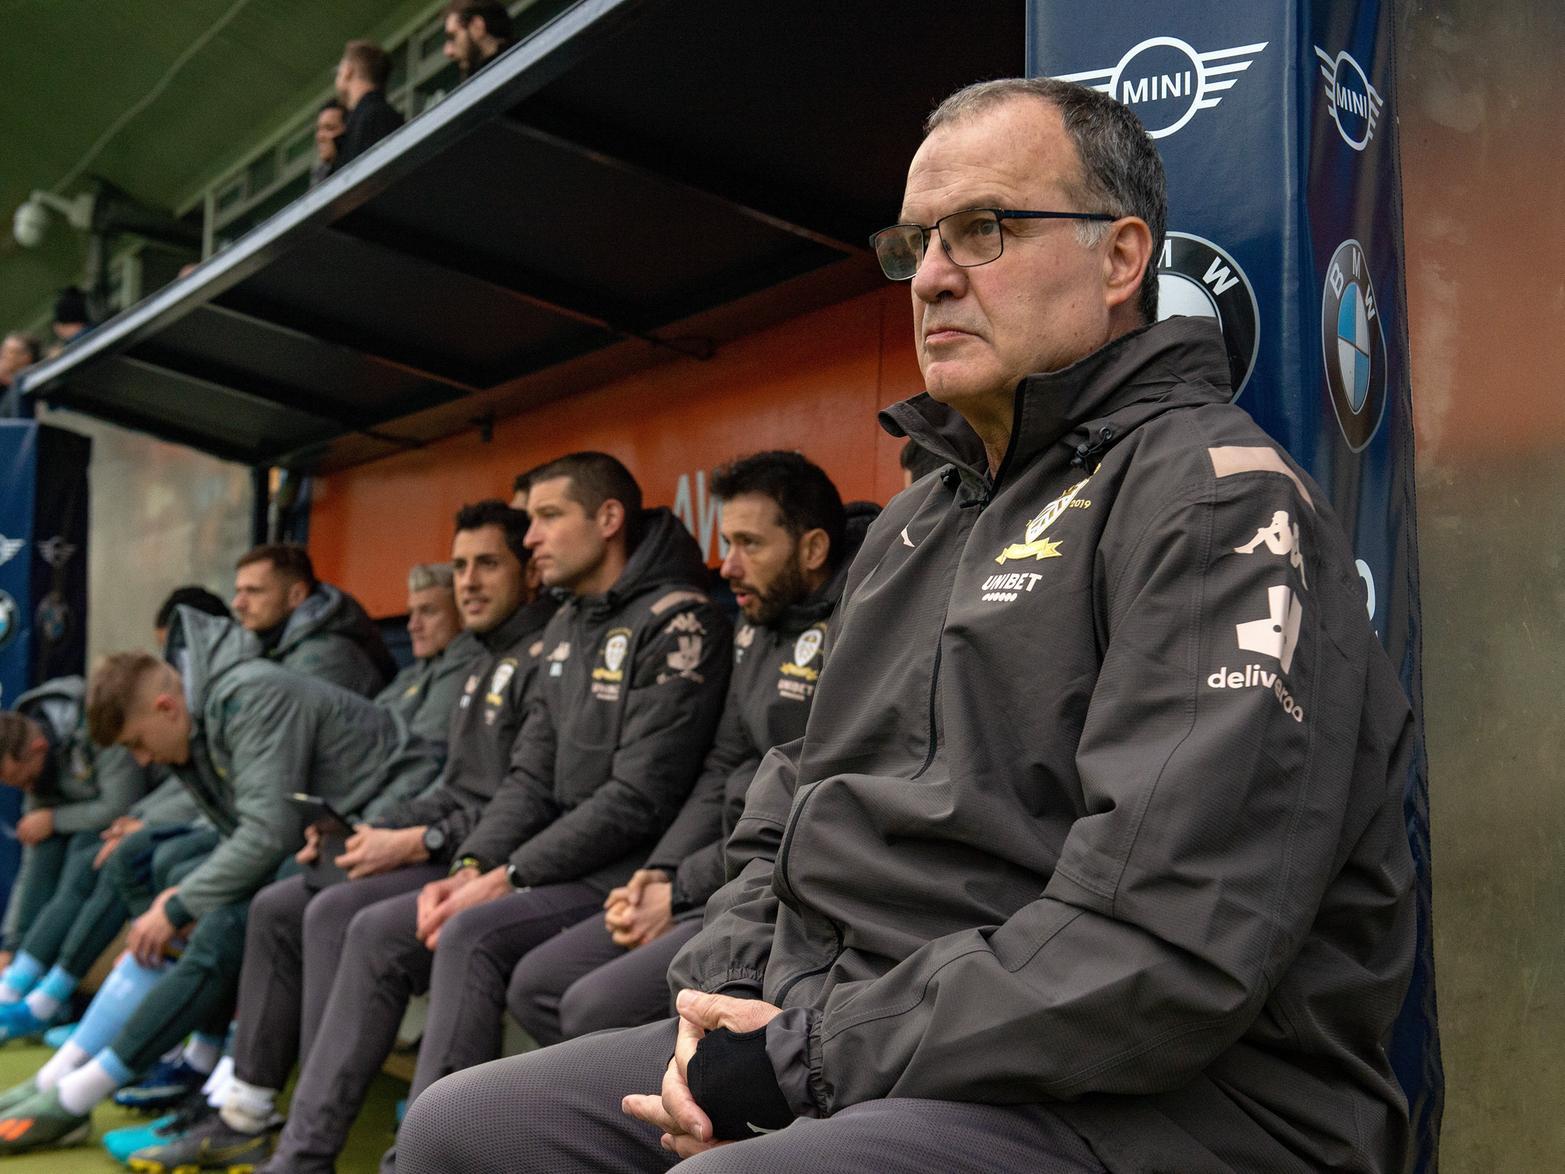 Leeds United head coach Marcelo Bielsa oversaw a 2-1 win over Luton Town on Saturday.